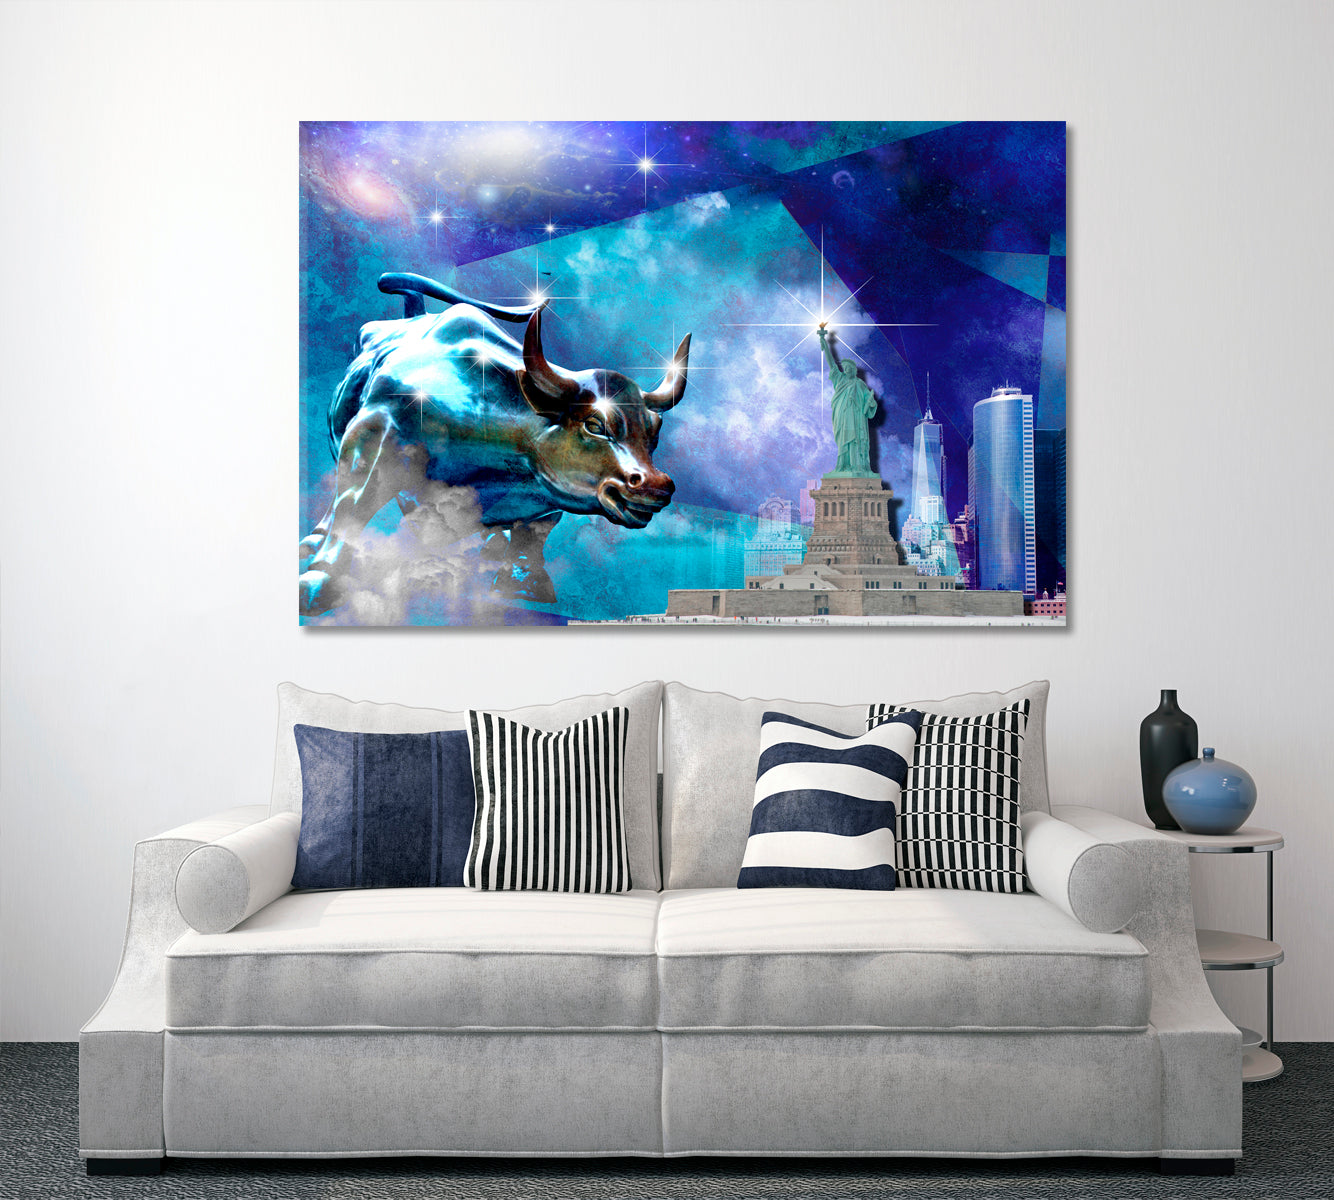 Charging Bull Sculpture and Statue of Liberty Cities Wall Art Artesty 1 panel 24" x 16" 